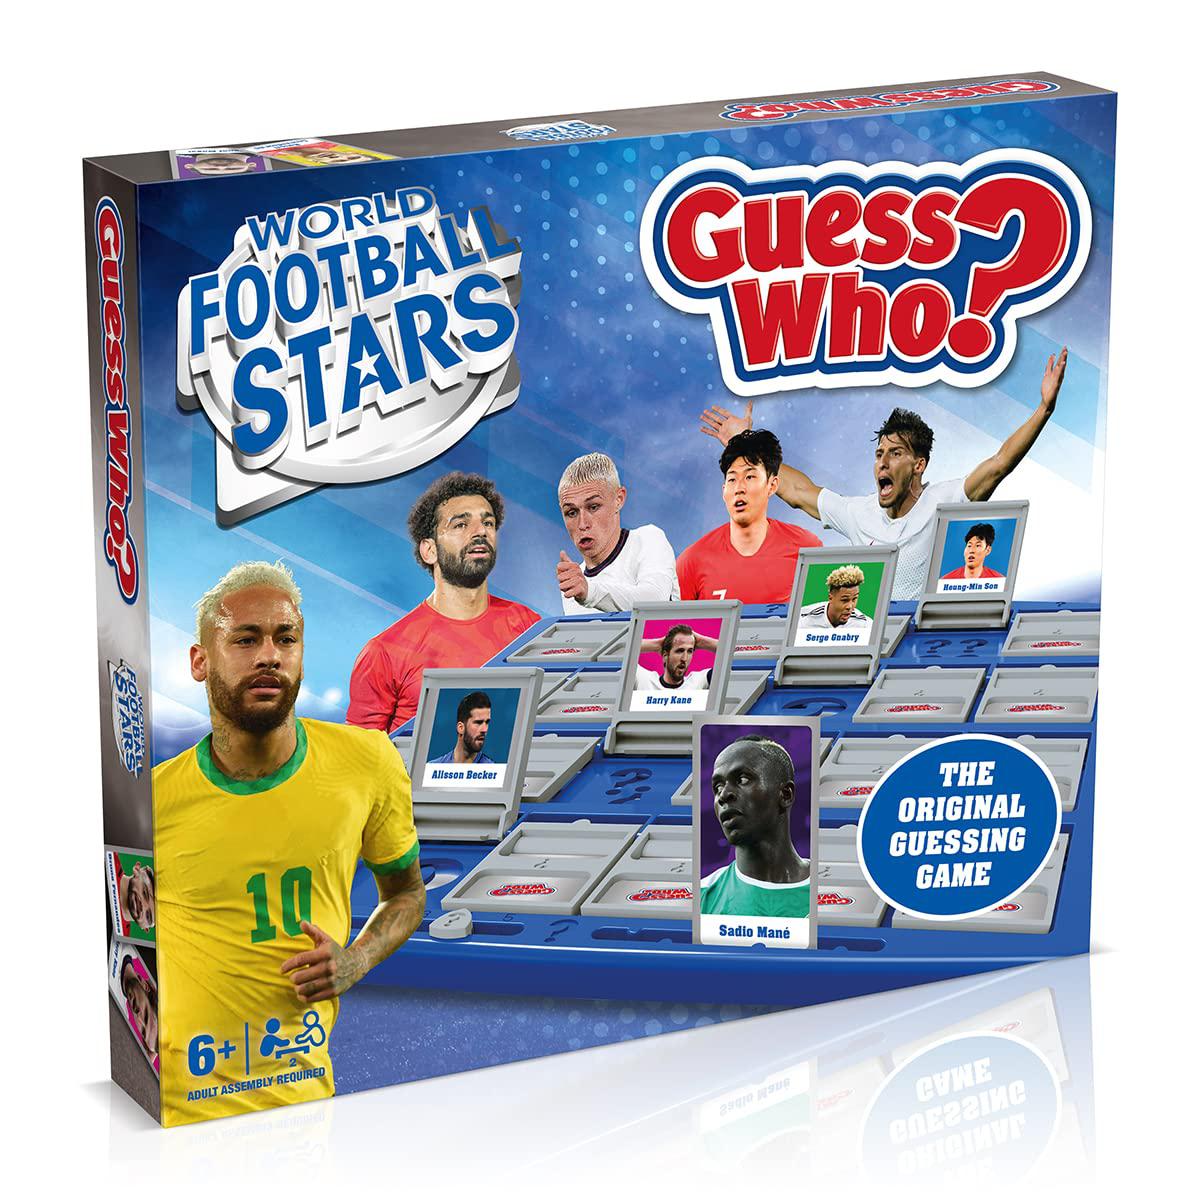 Winning Moves Games winning moves wm02282-en1-6 world football stars guess who board game